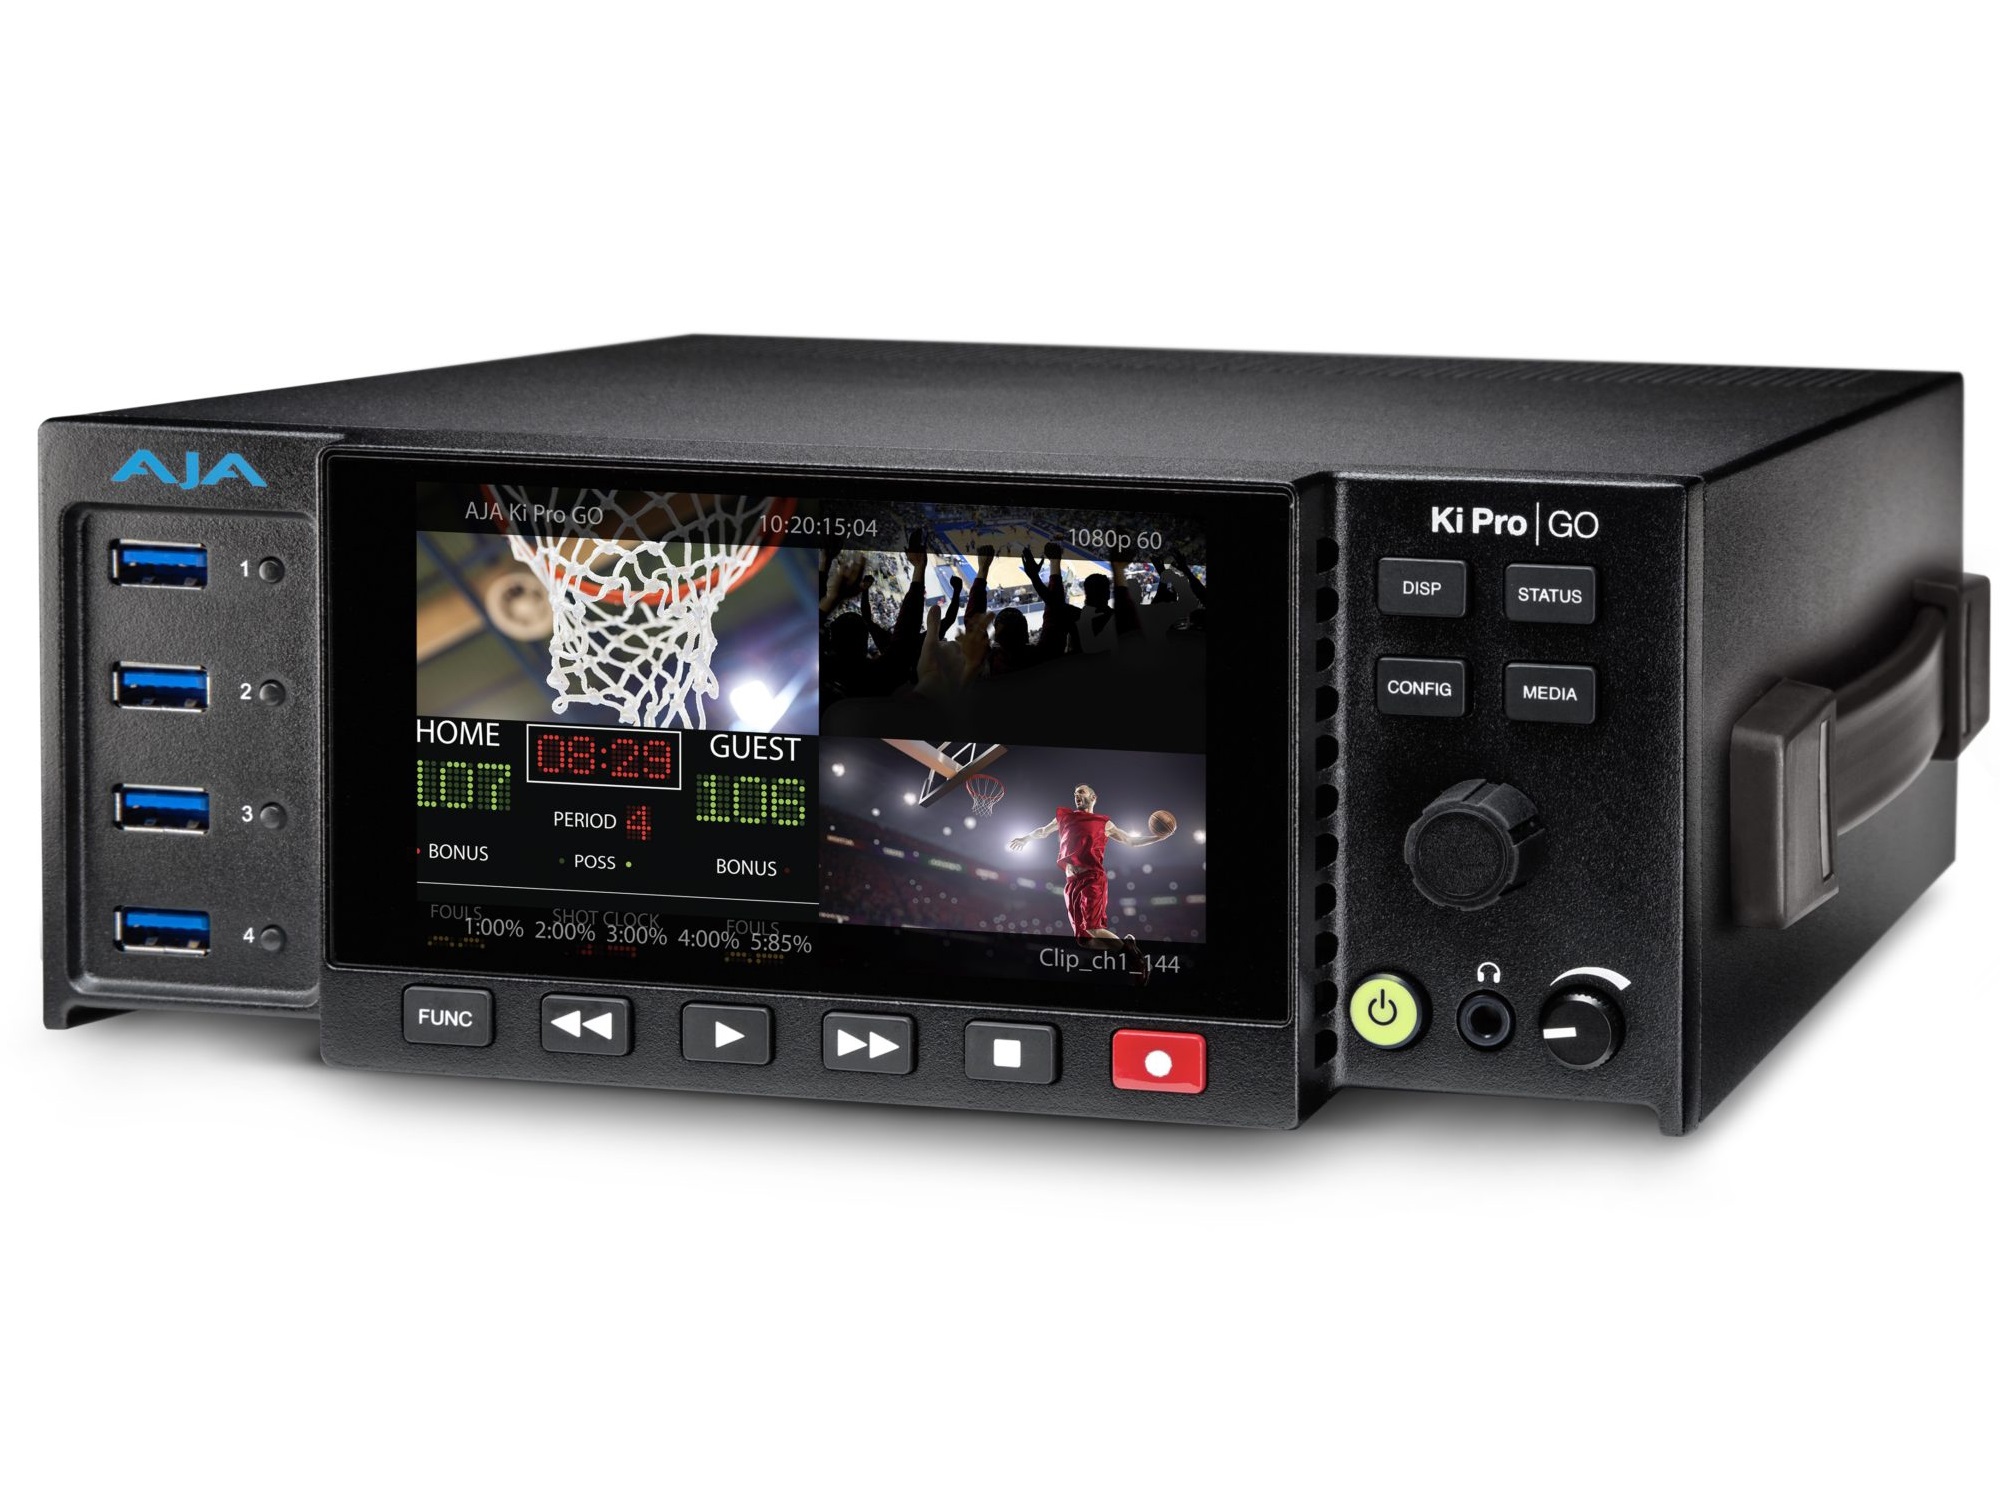 Ki Pro GO Multi-Channel HD H.264 USB 3.0 Recorder and Player by AJA